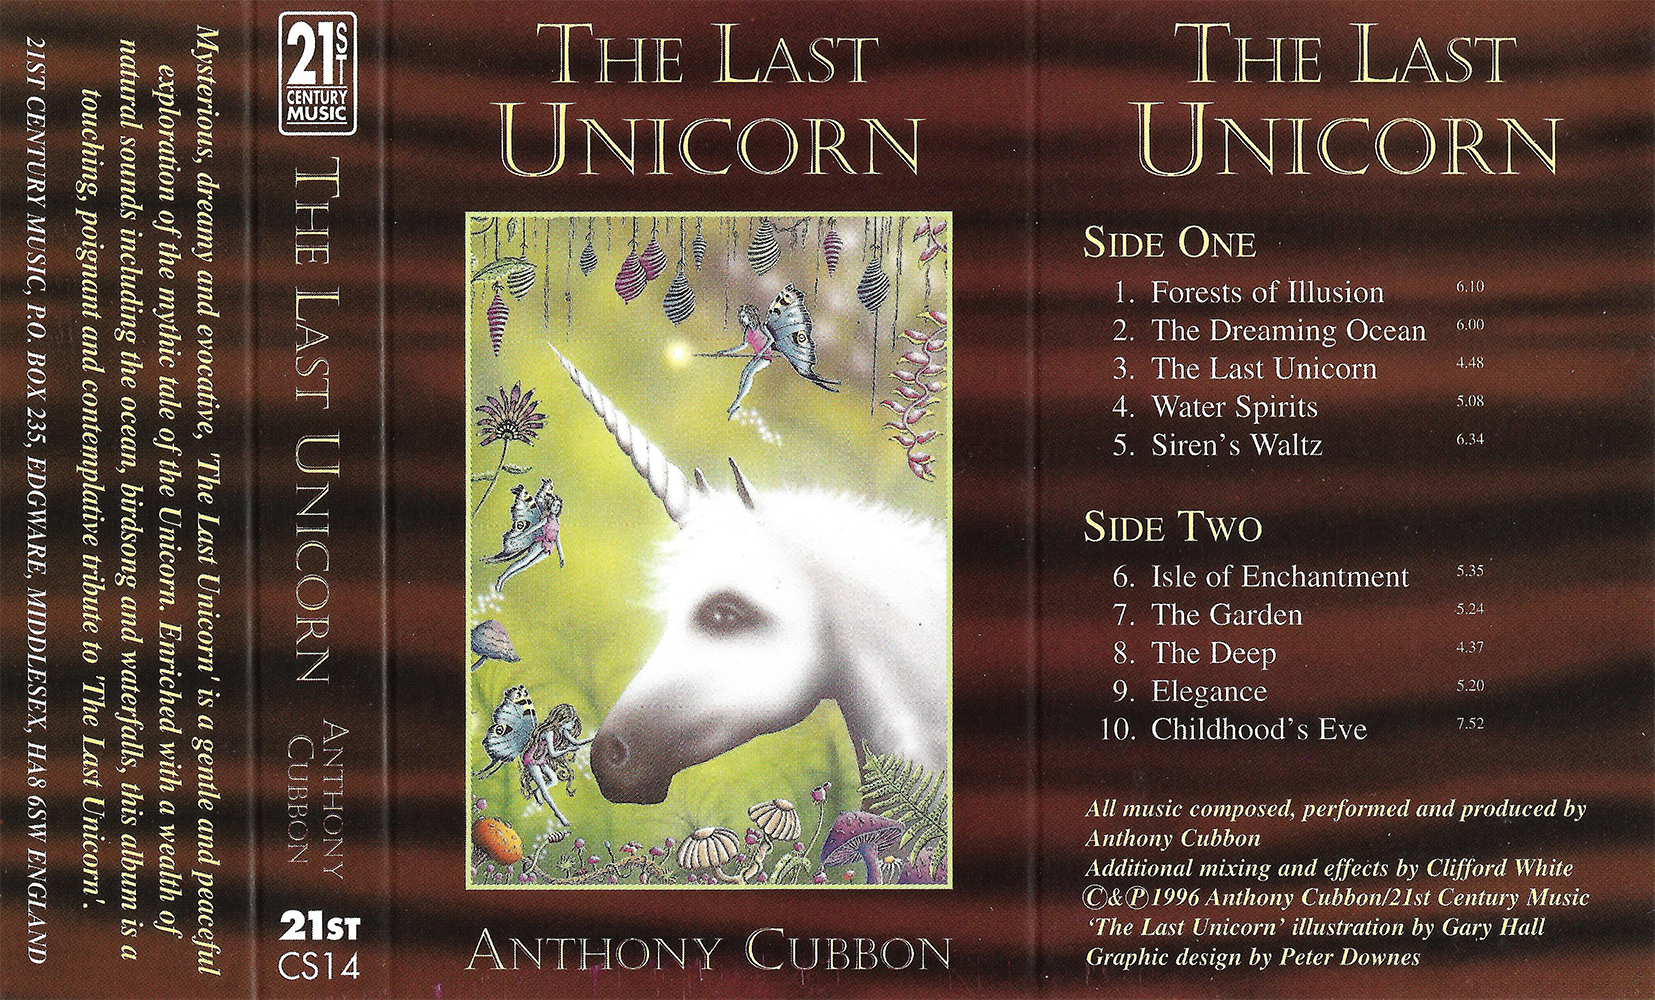 The Last Unicorn by Anthony Cubbon